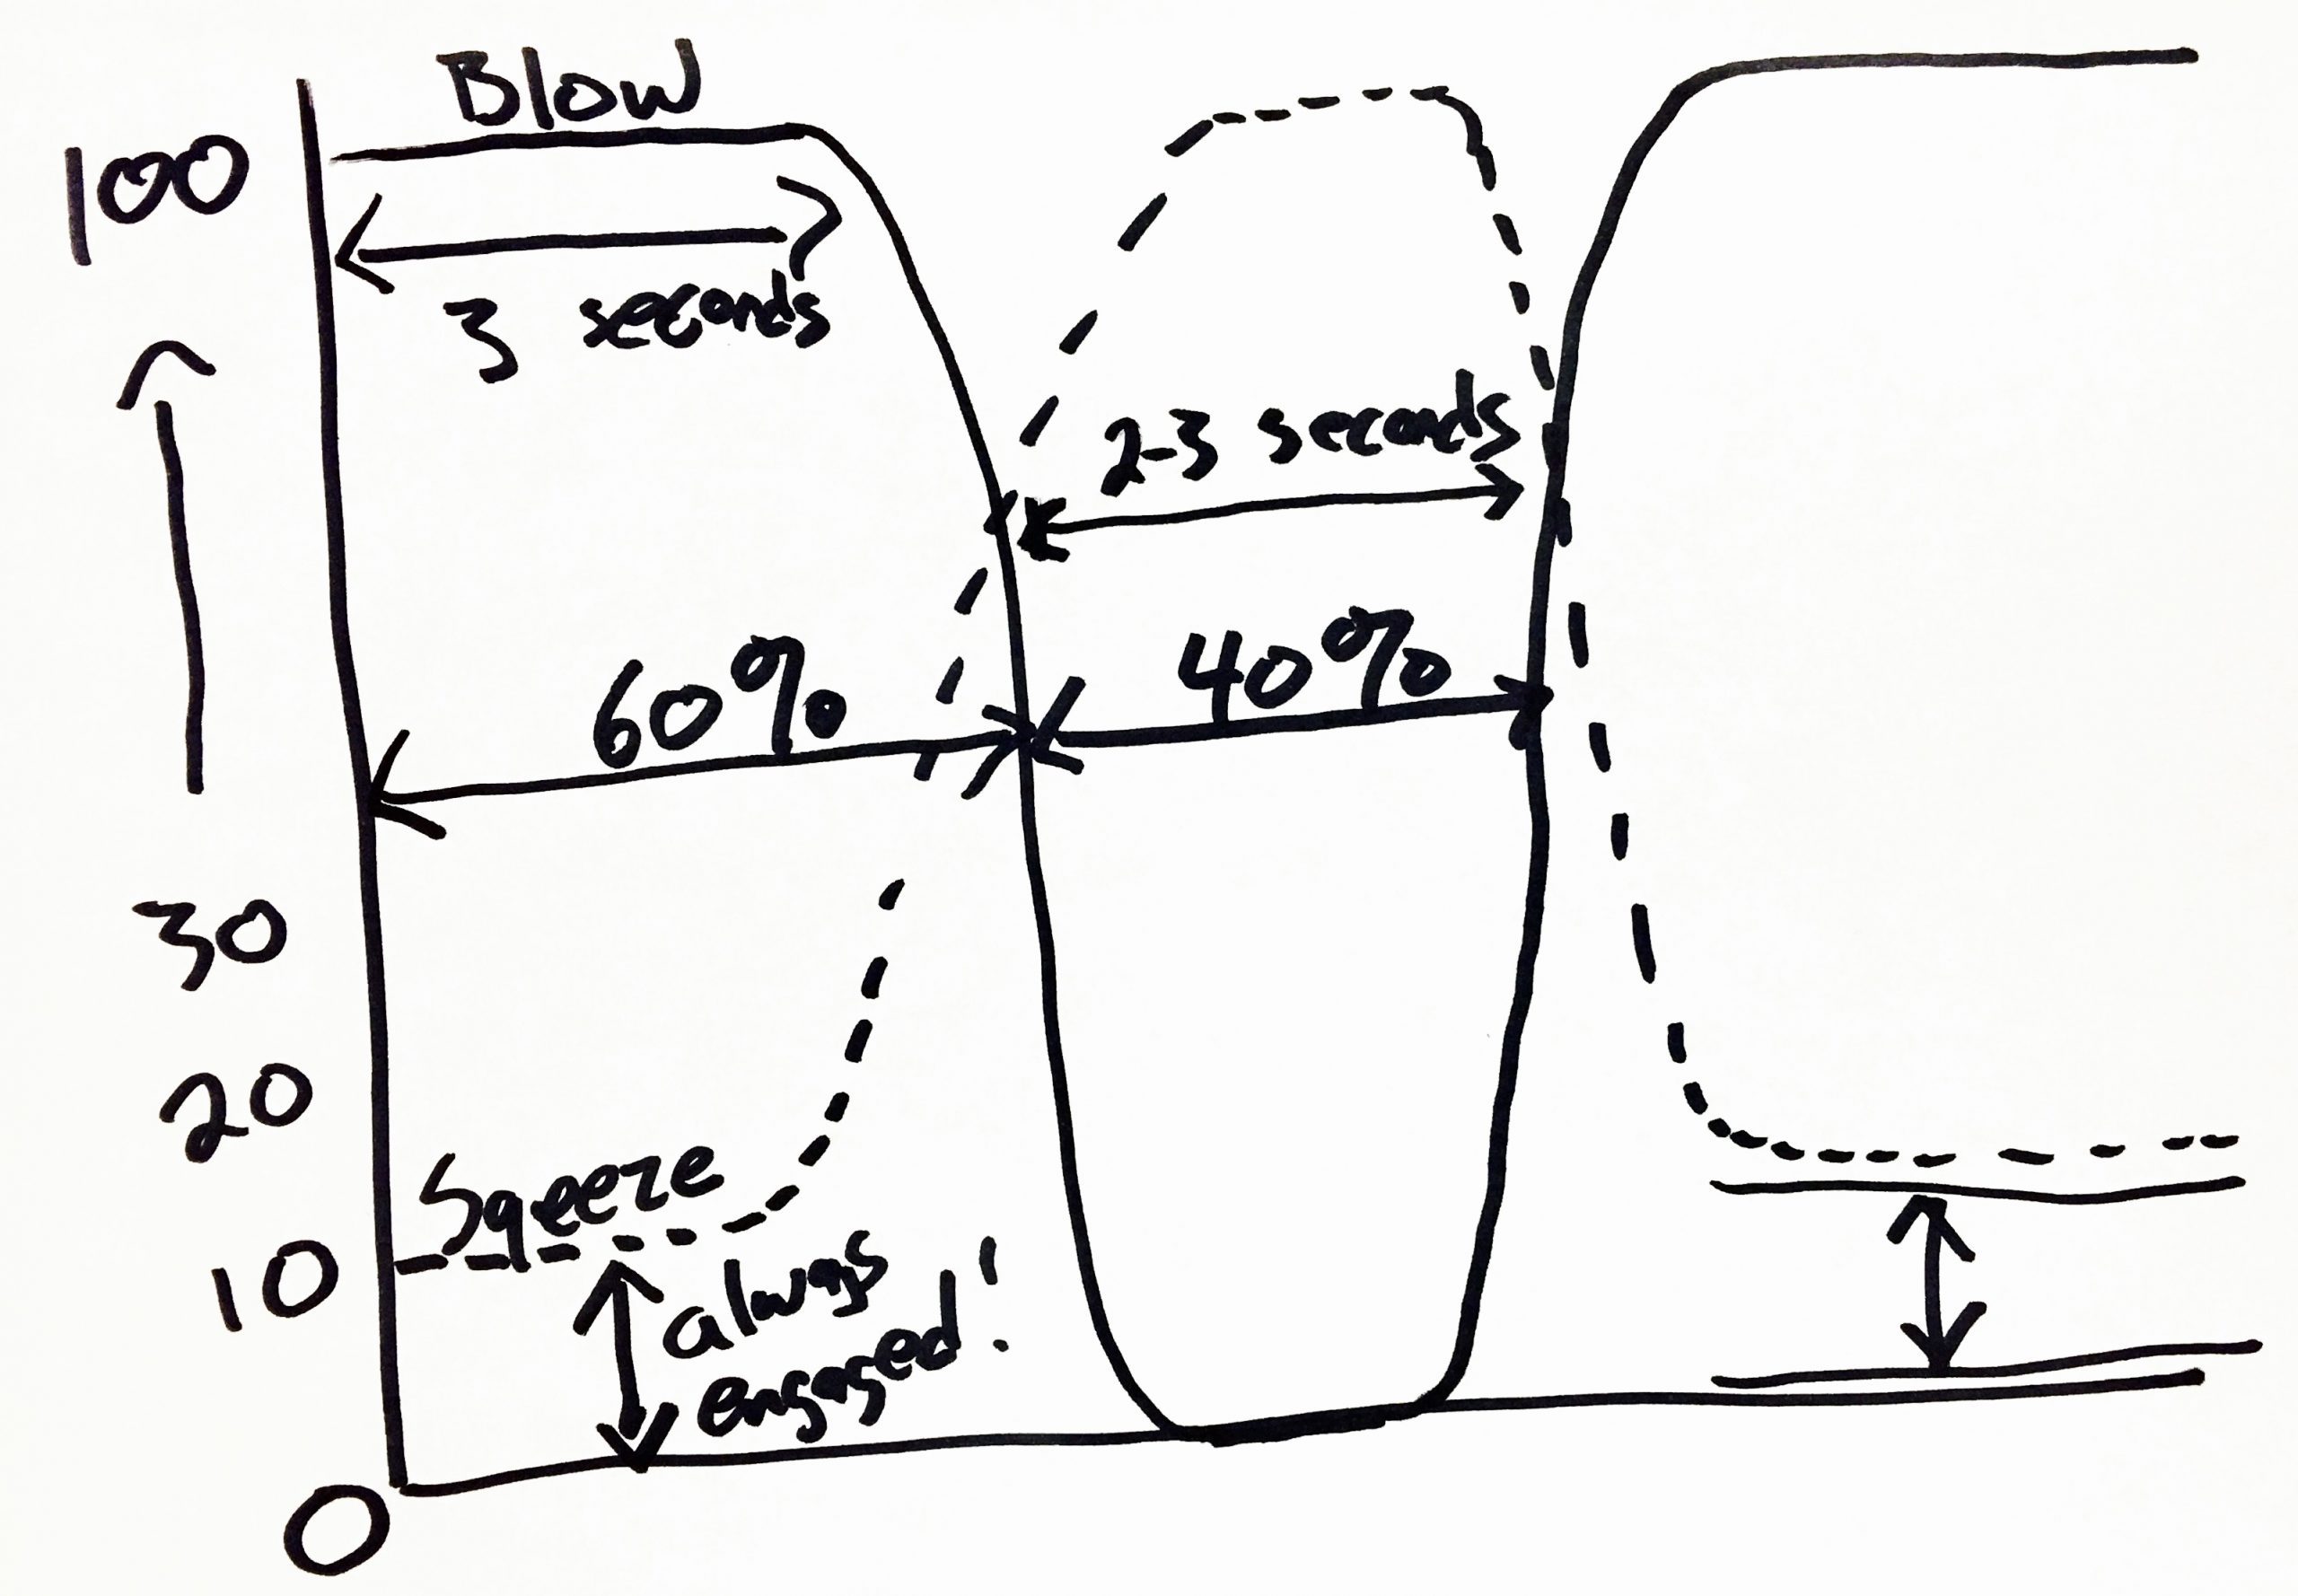 pysical-steady-blowing-diagram-6737921